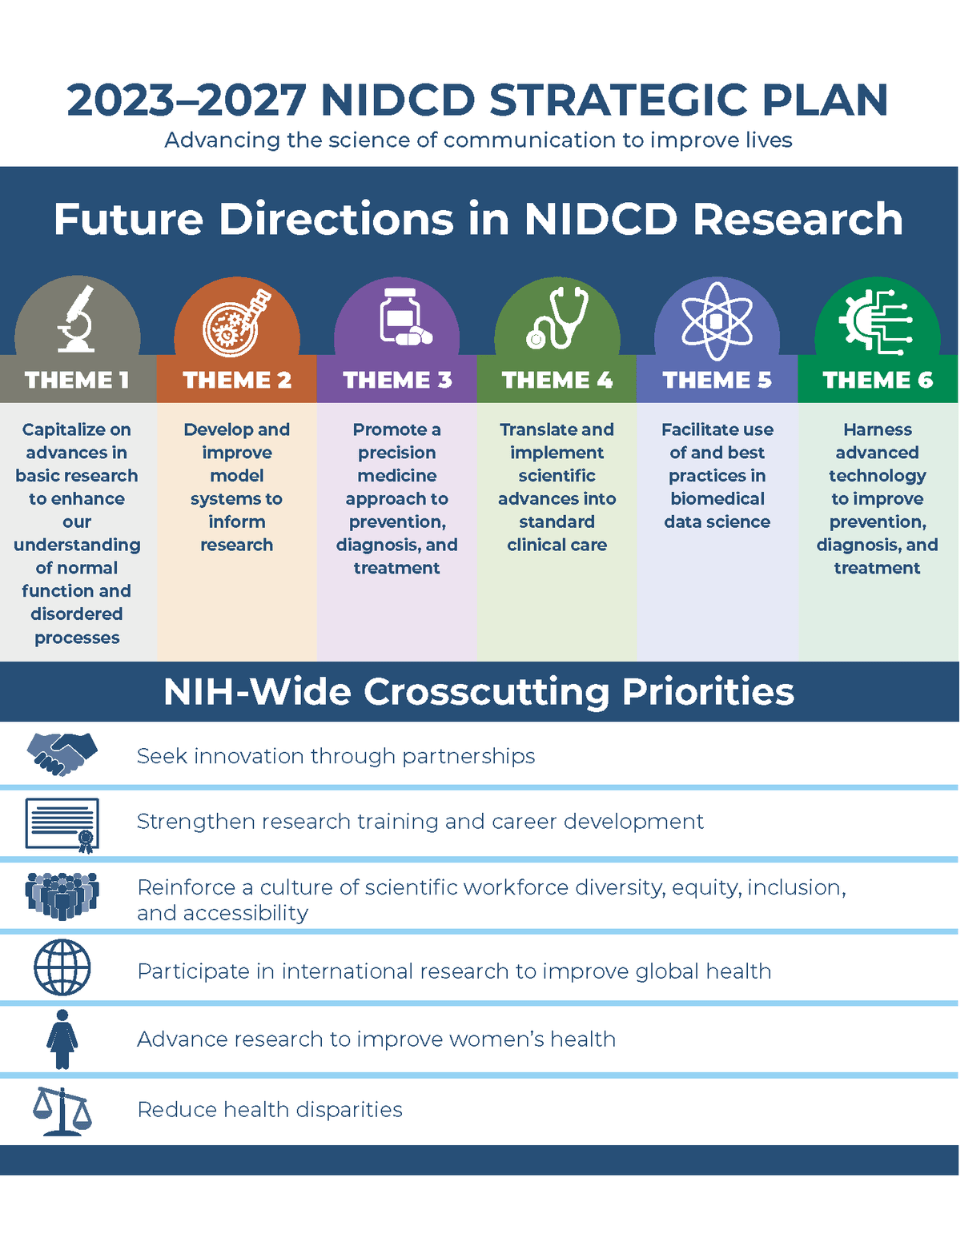 An infographic summarizing future directions in NIDCD Research in relation to the 2023-2027 NIDCD Strategic Plan and NIH-wide crosscutting priorities.